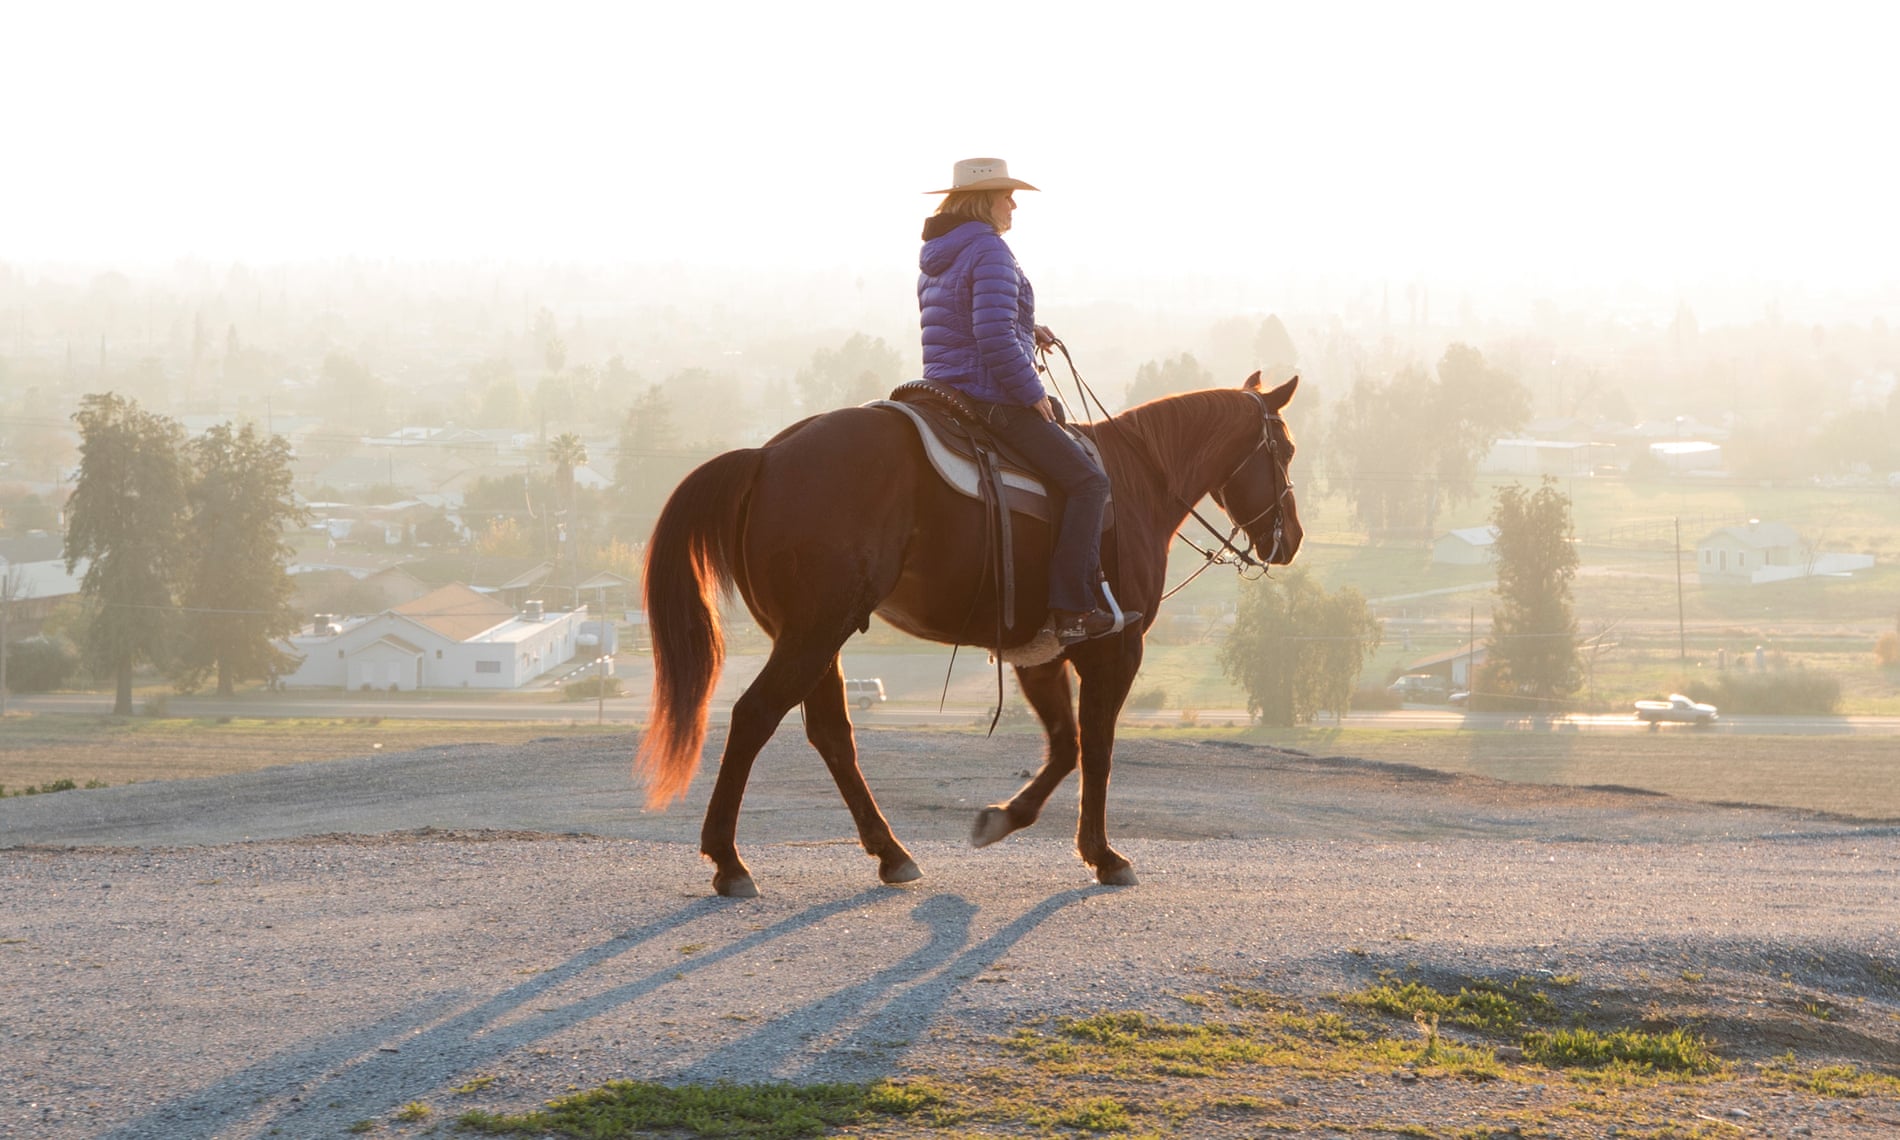 A horse rider desends into the haze in Porterville –one of the most poluted cities in the US. 